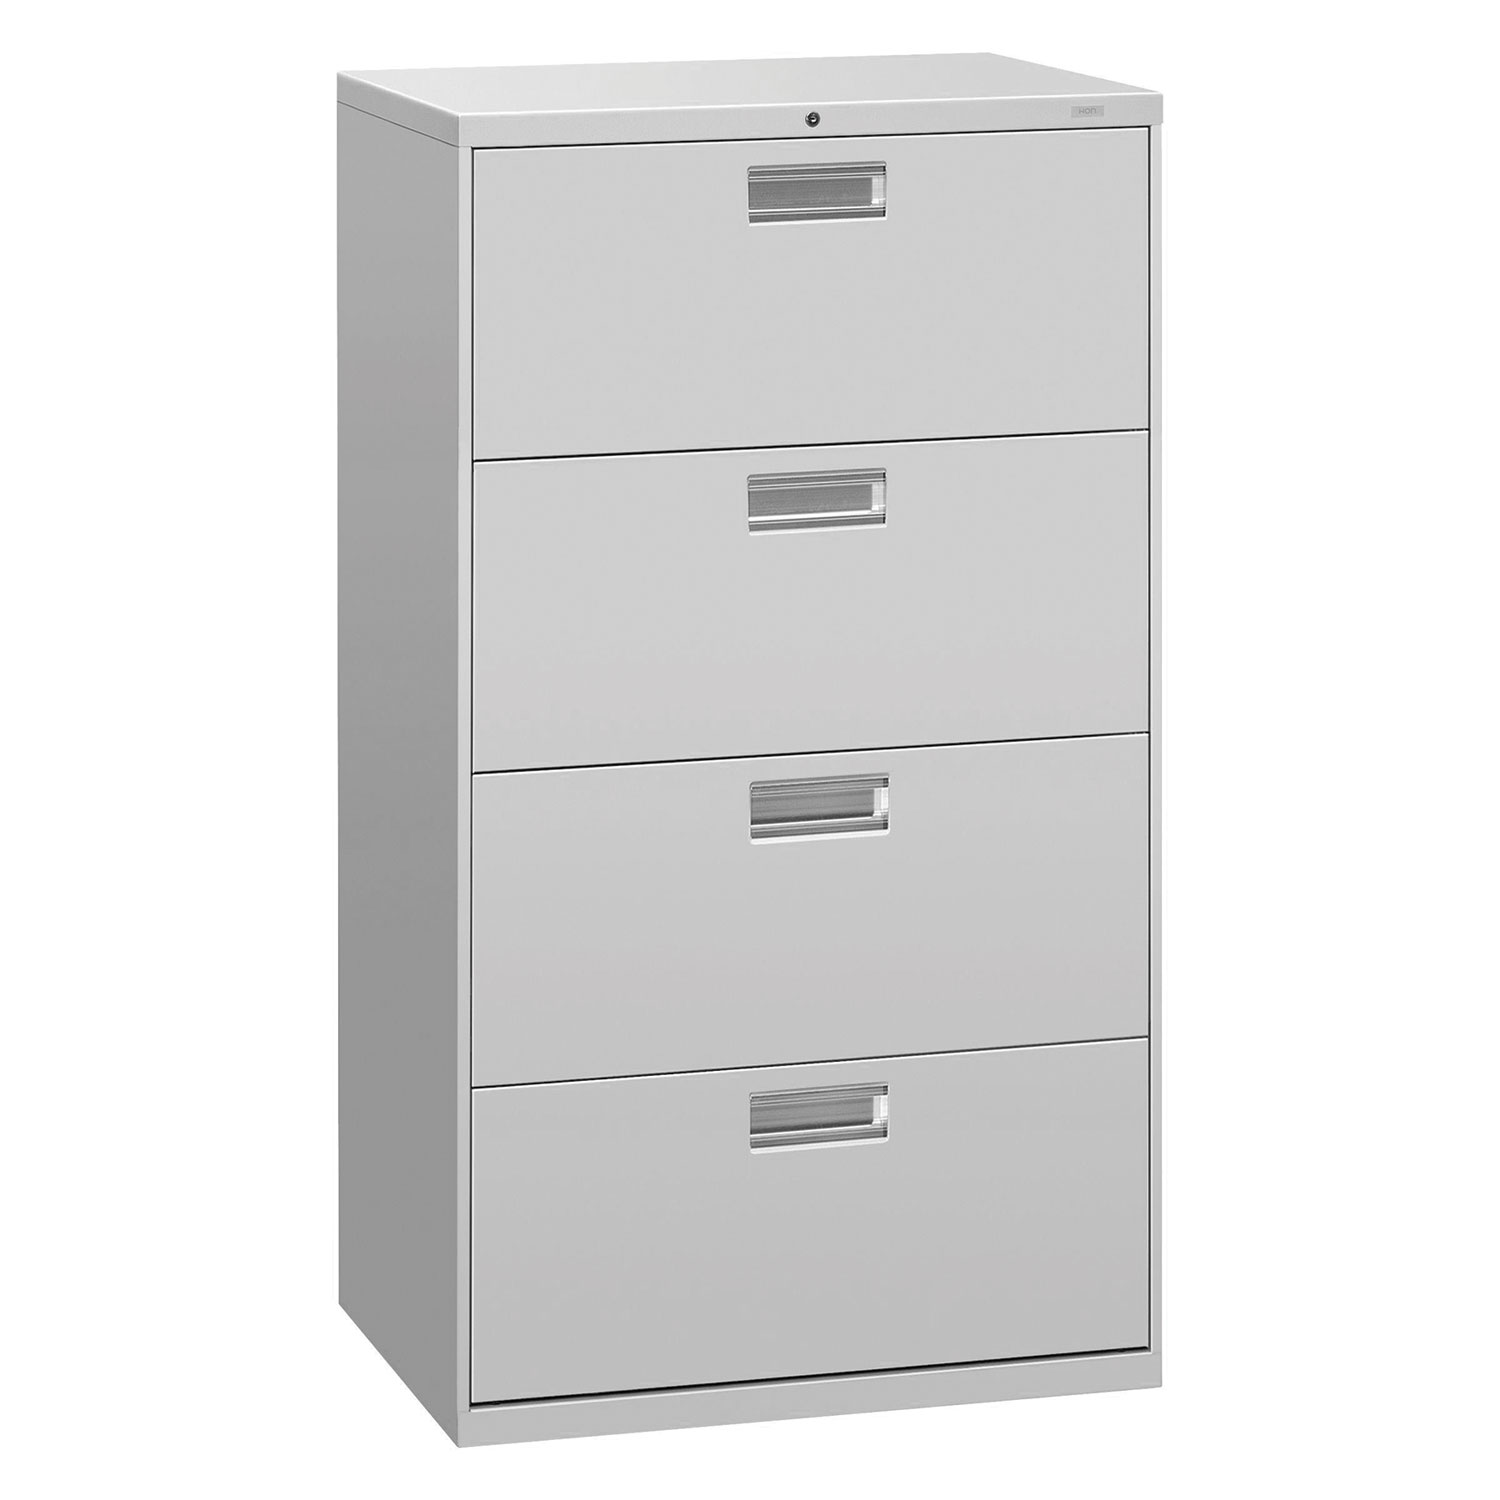 600 Series Four-Drawer Lateral File, 30w x 19-1/4d, Light Gray